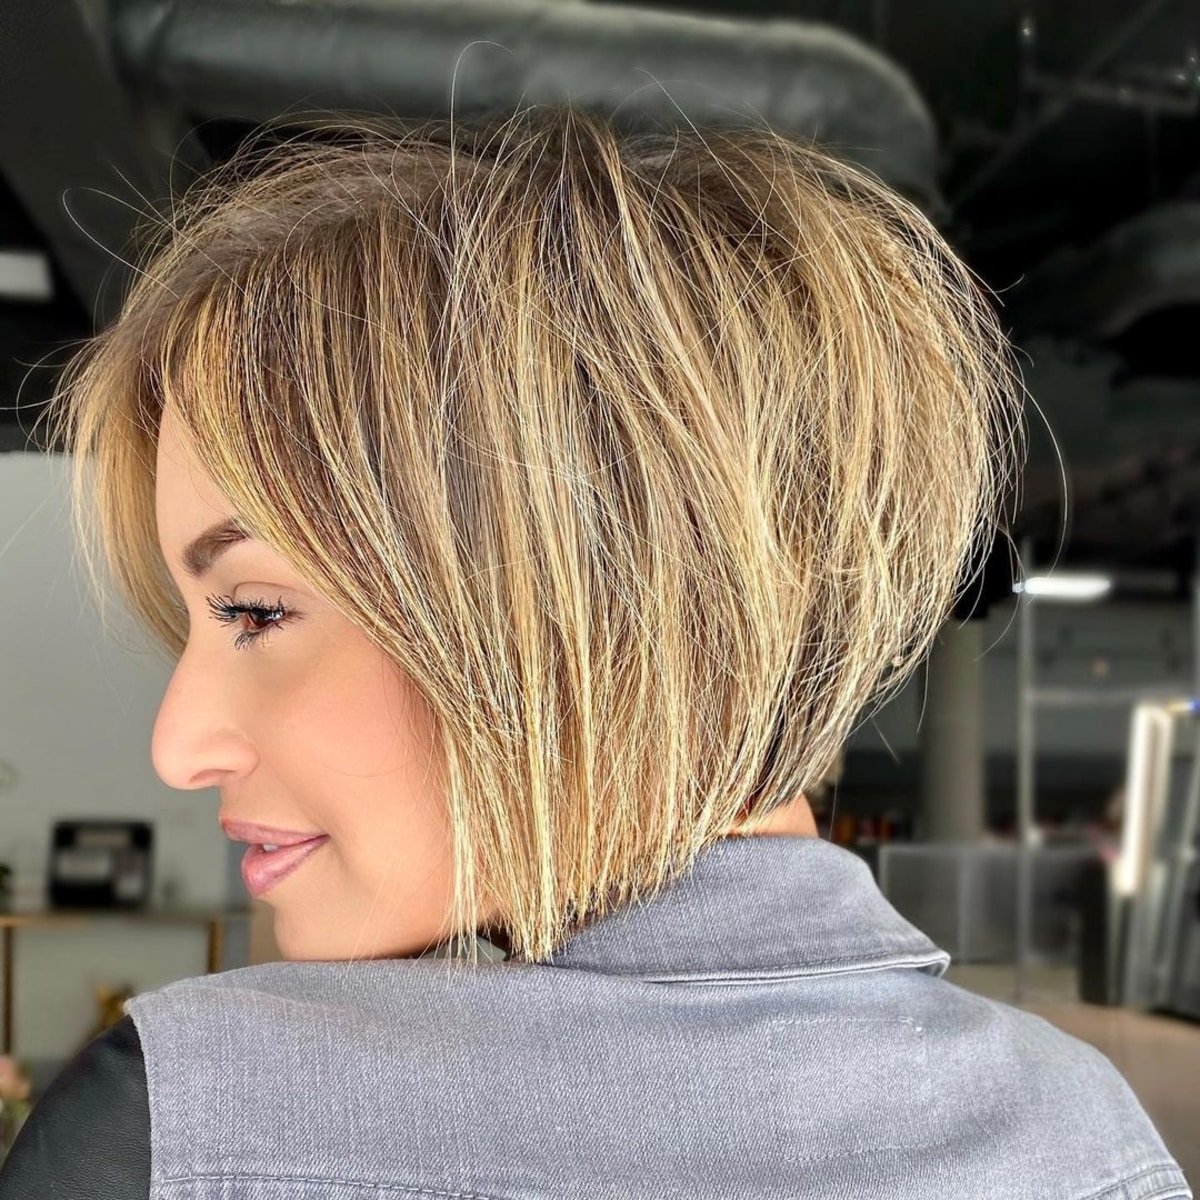 A Very short inverted bob